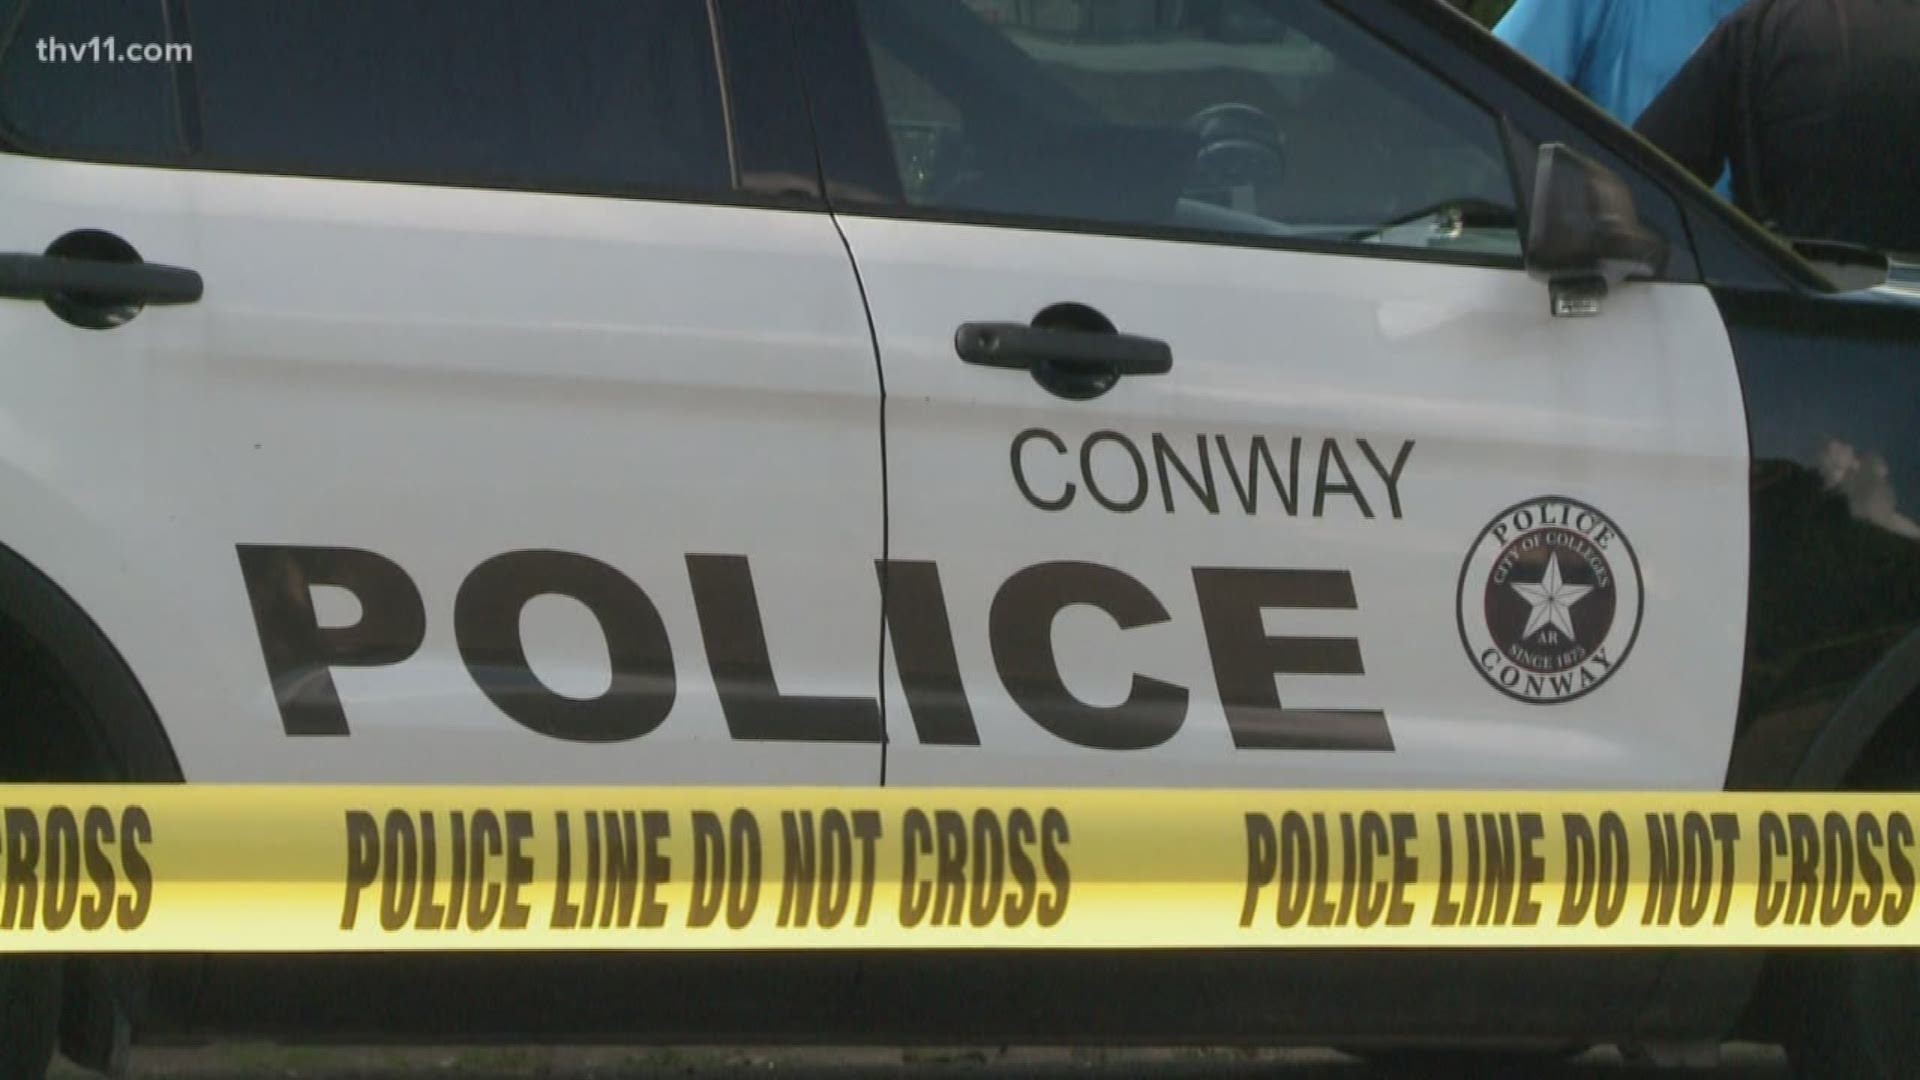 Authorities in Conway identified the two people found dead in a home on Club Lane.